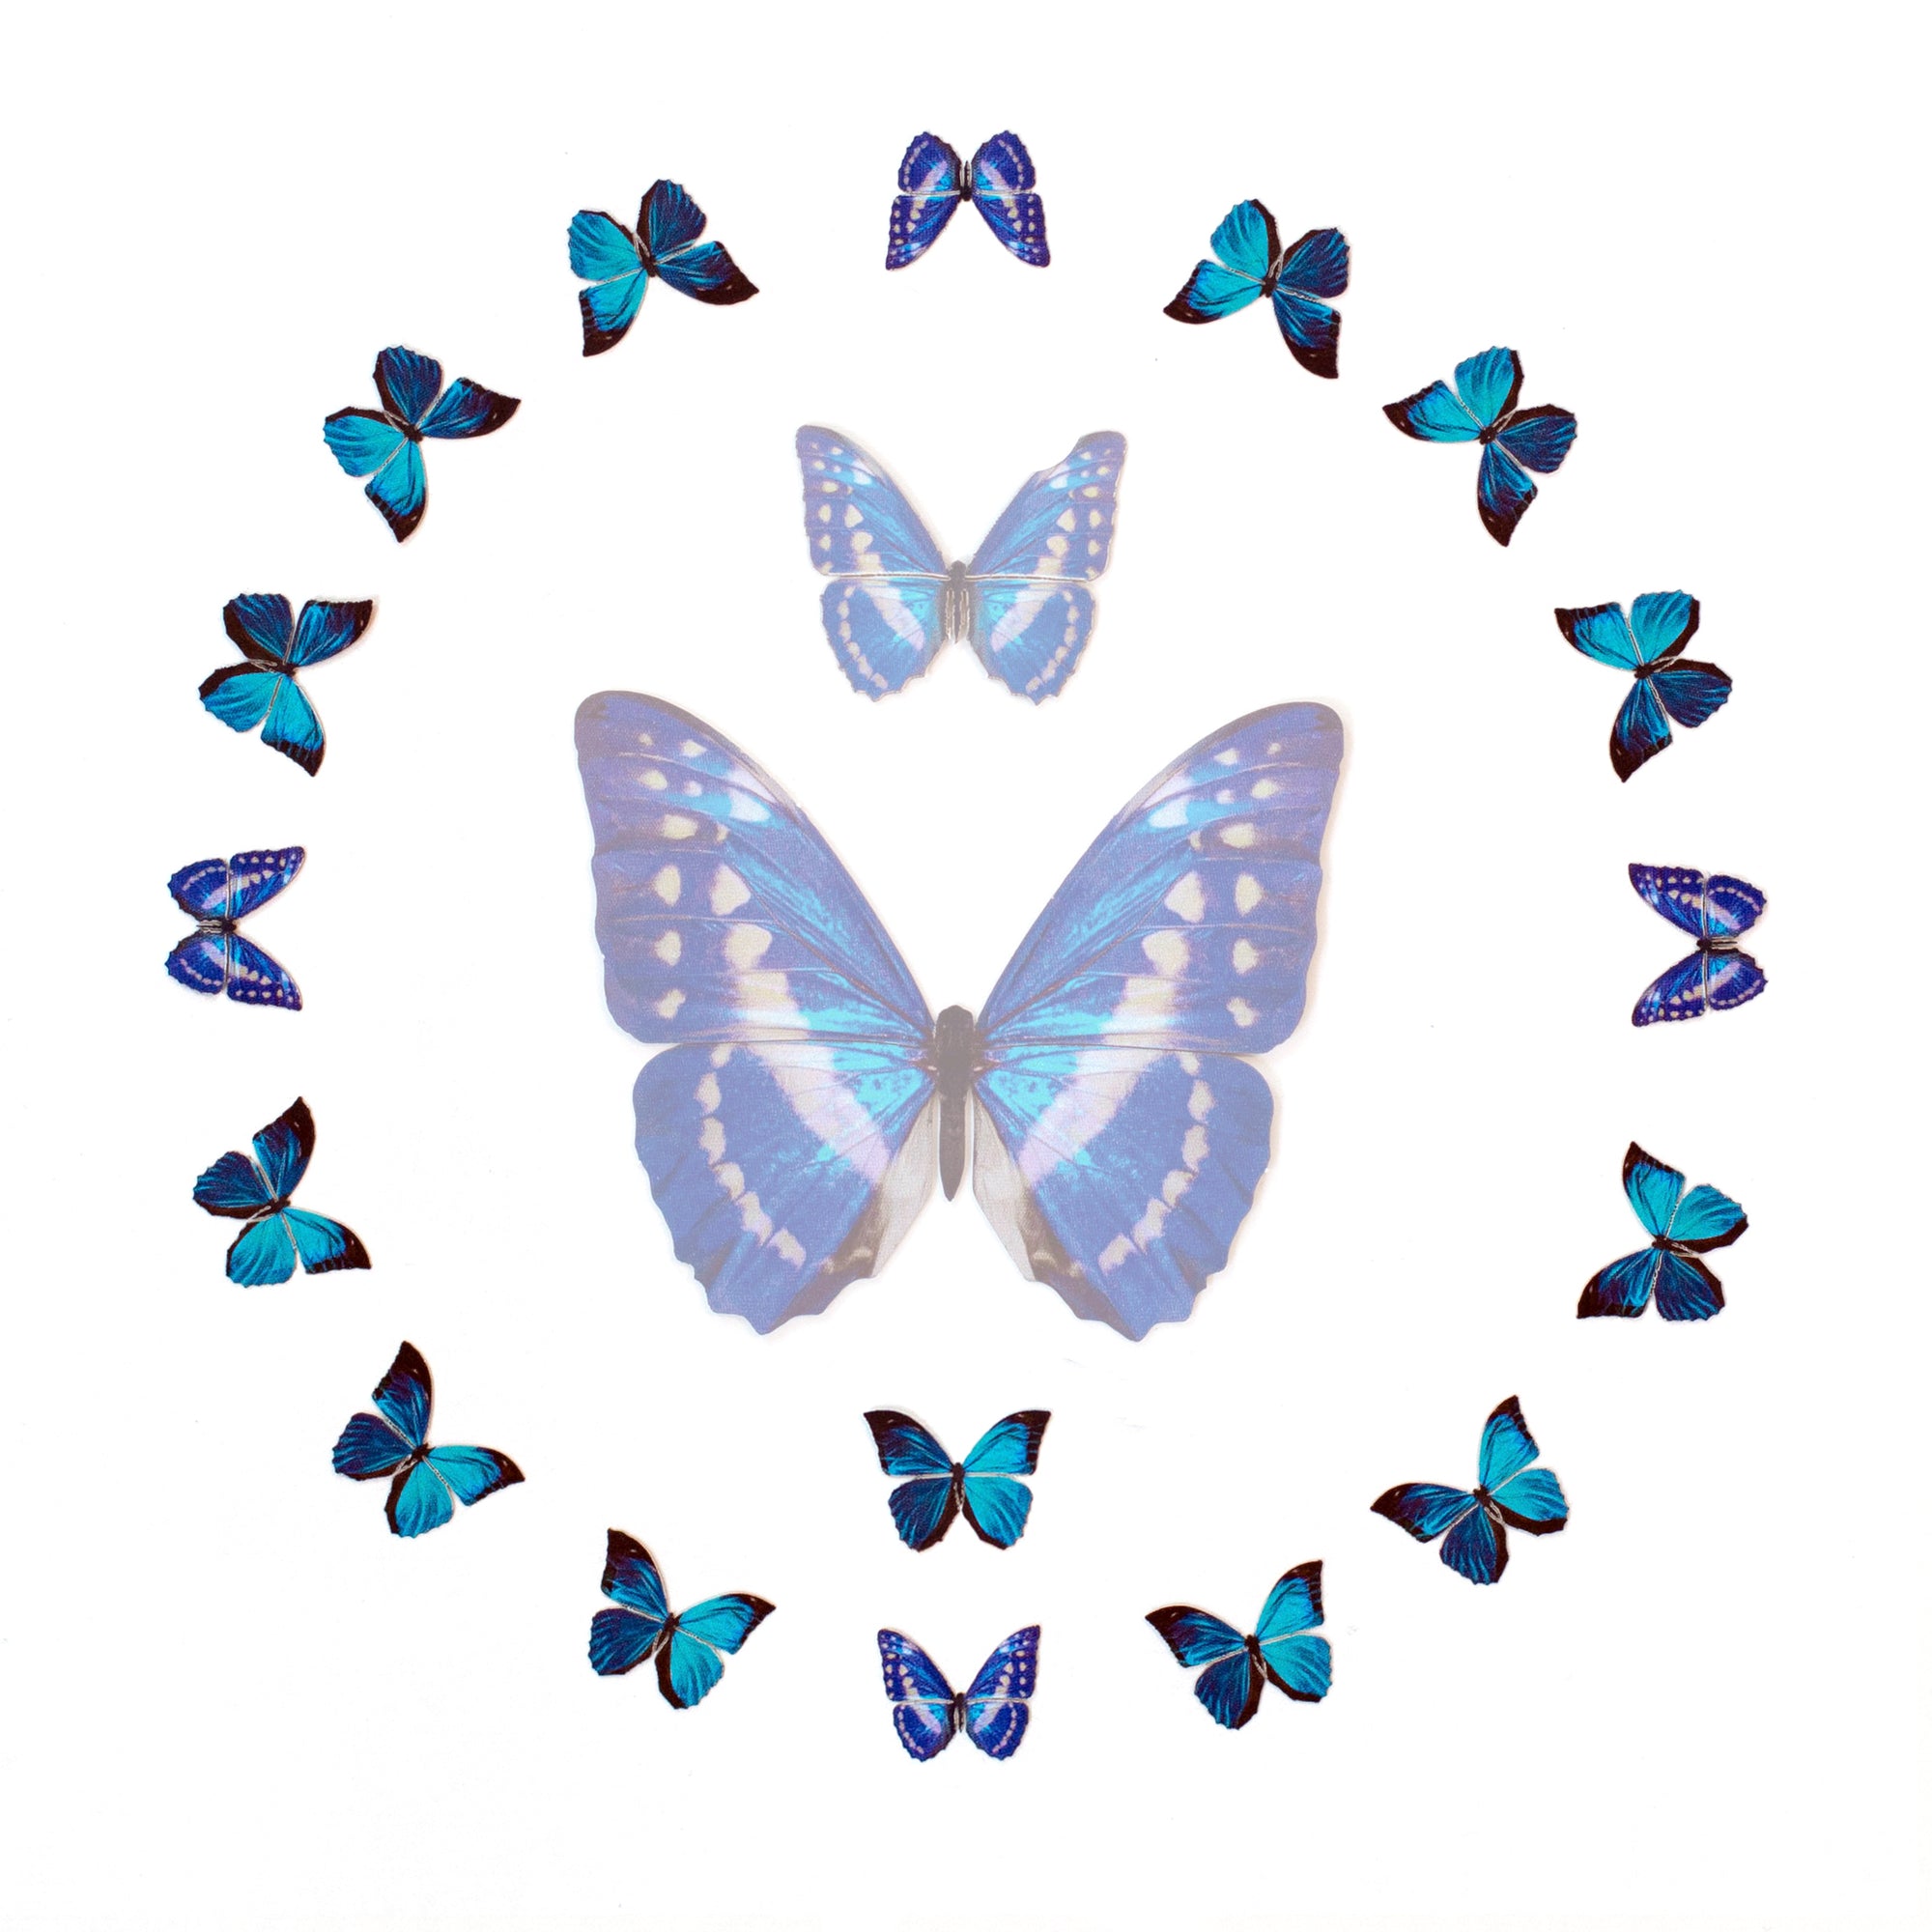 'Cerulean' Micro Morpho Butterfly Collection Artist Wholesale